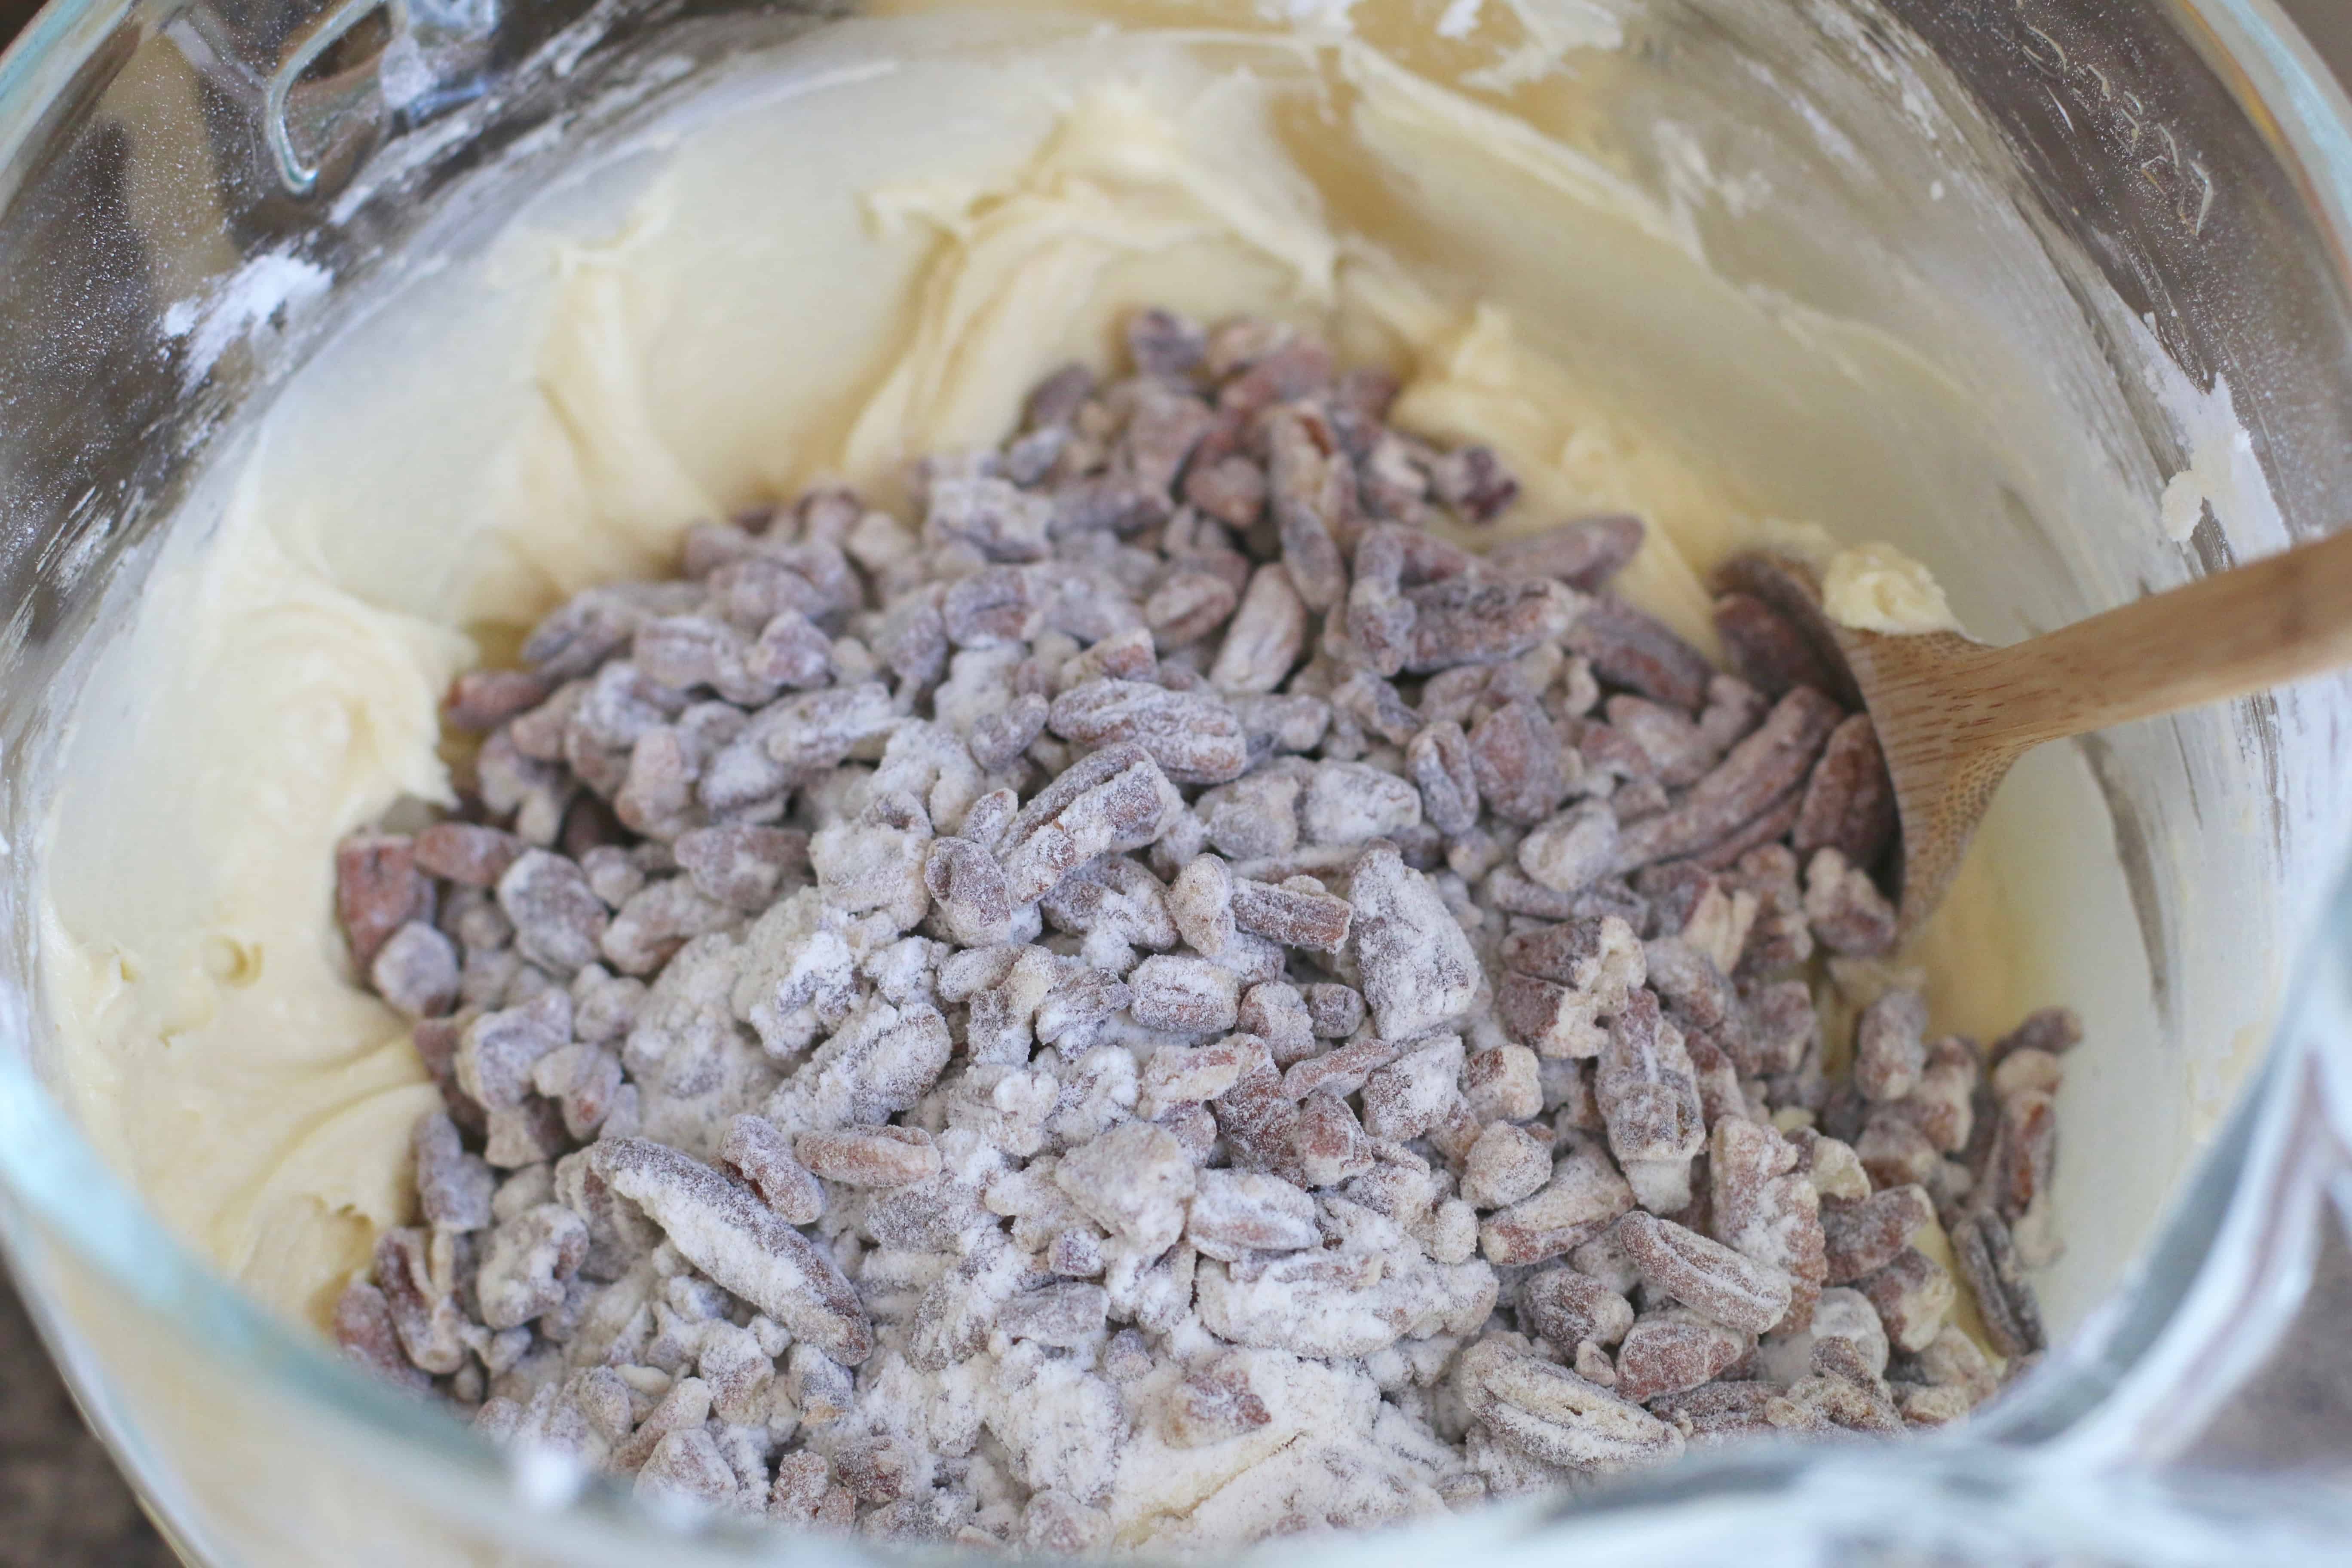 flour coated pecans added to pound cake batter in a large bowl.